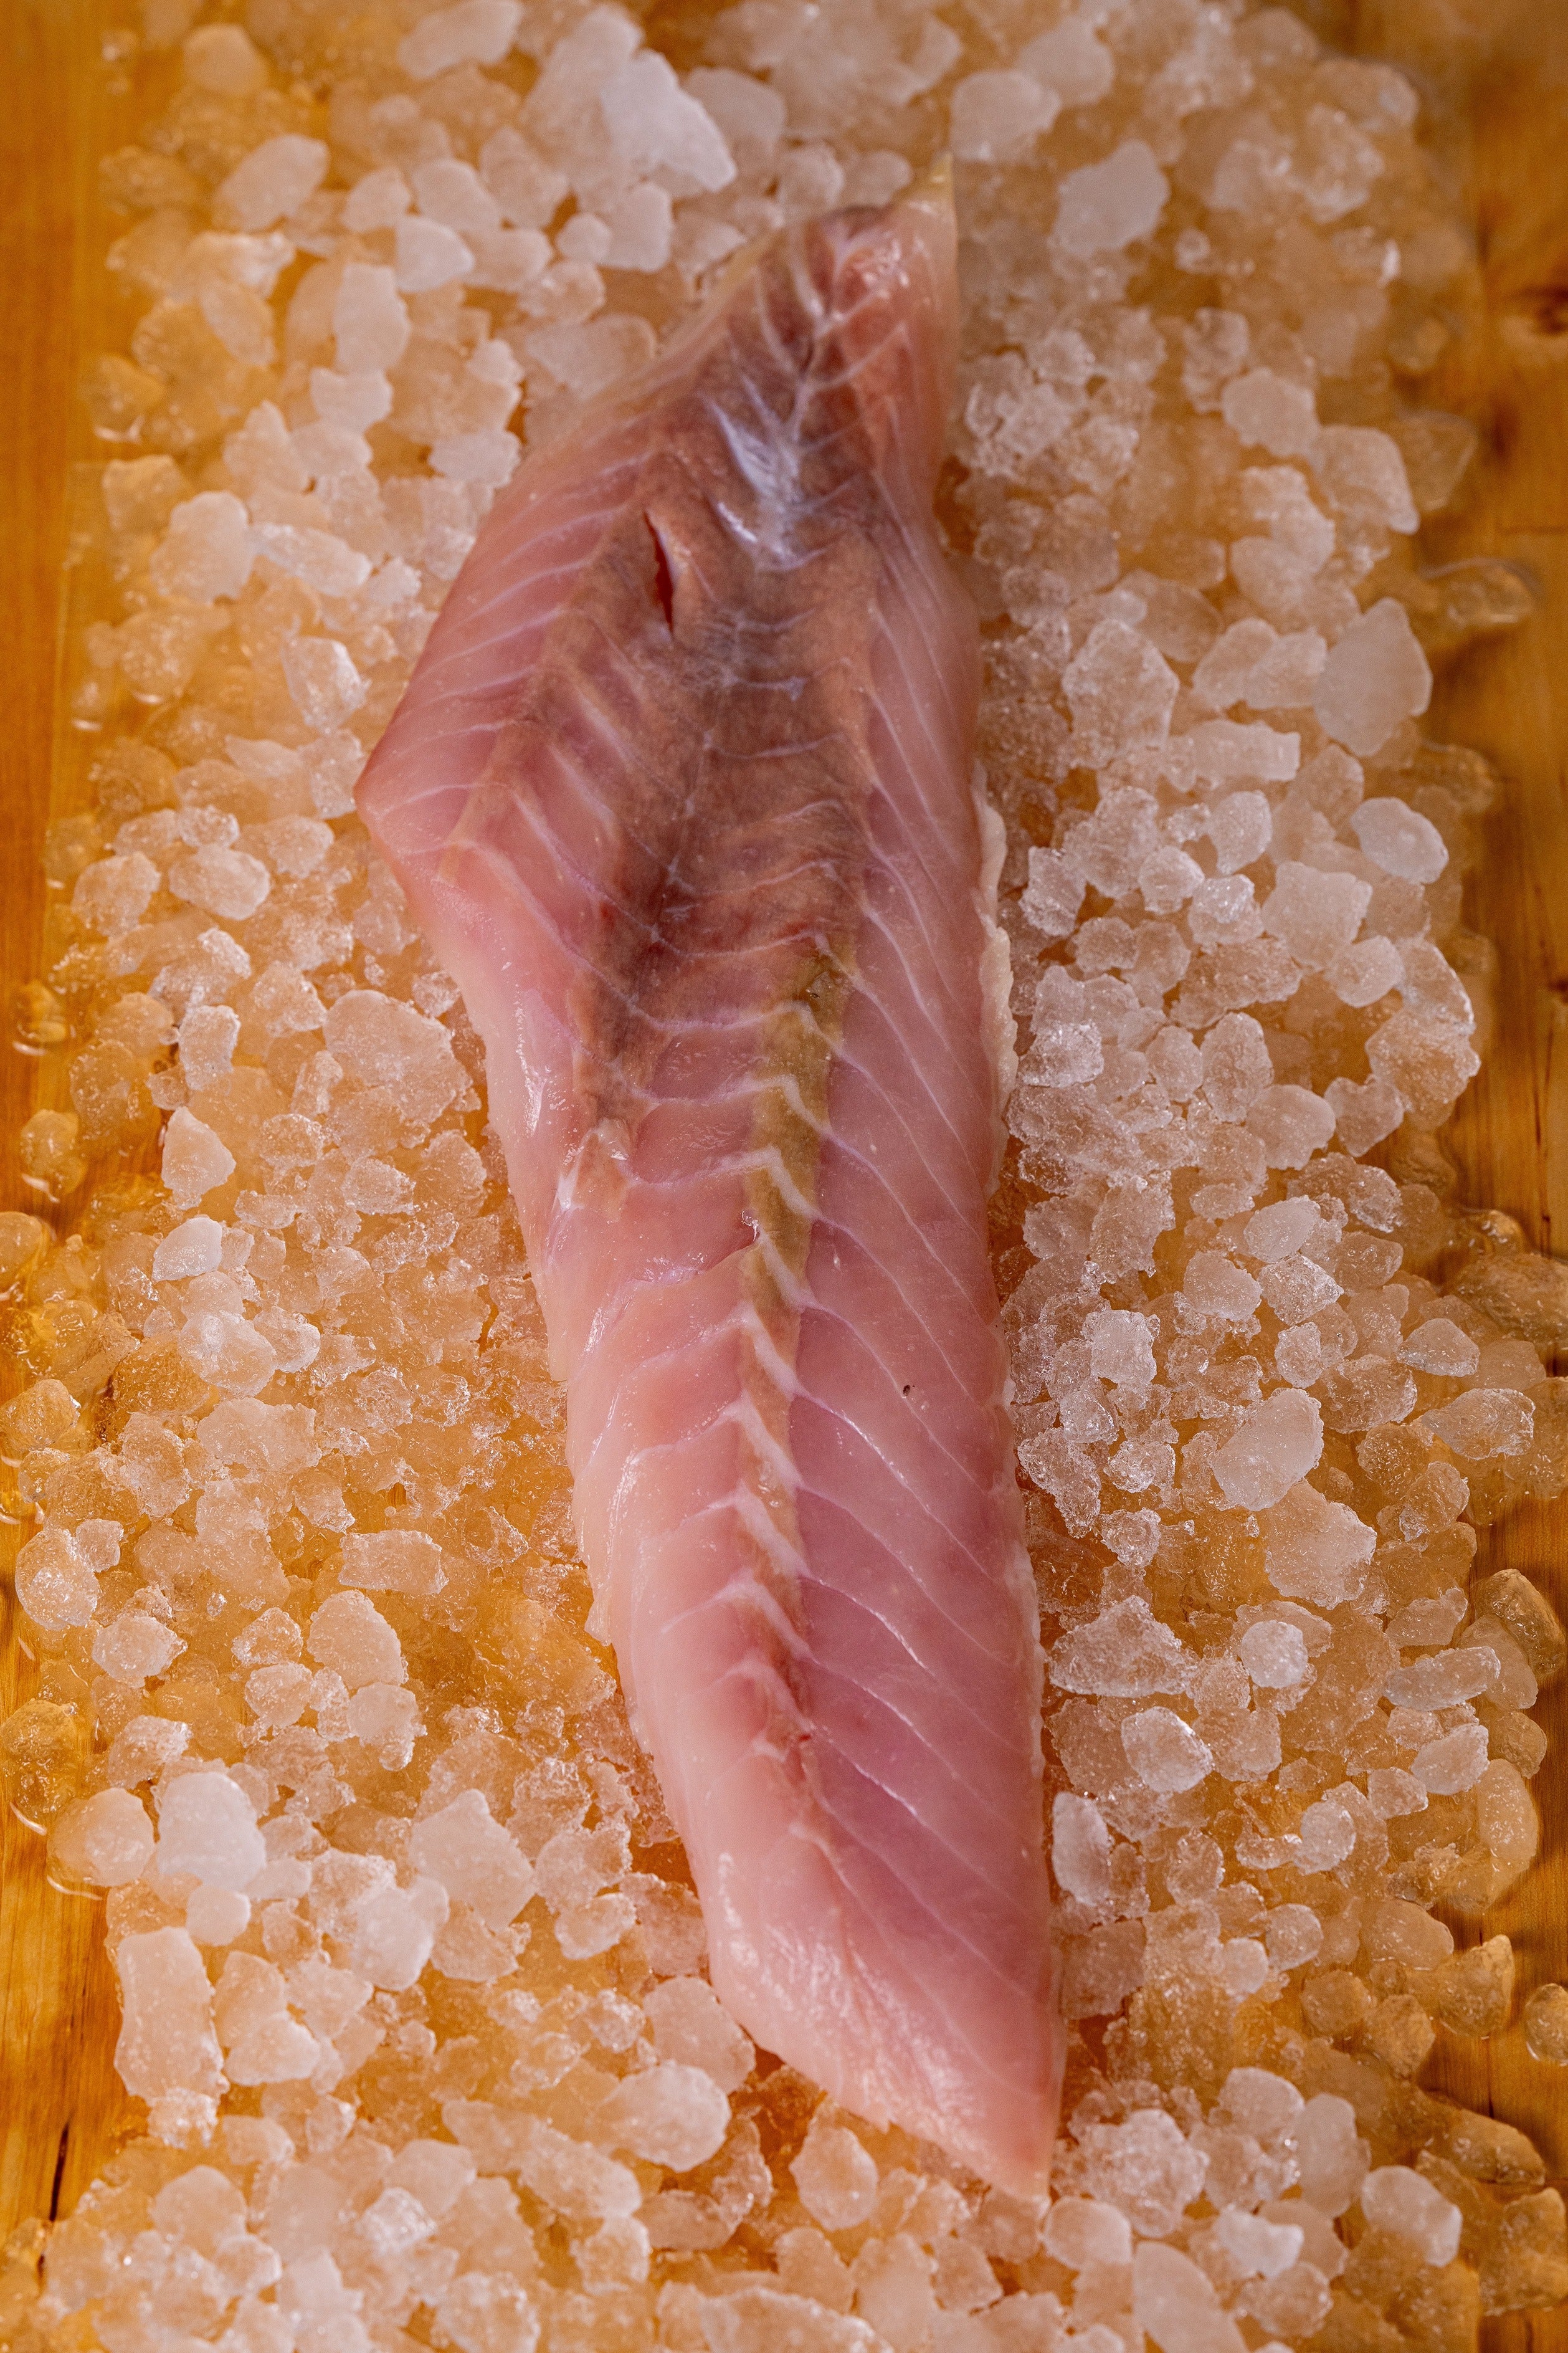 RED SNAPPER